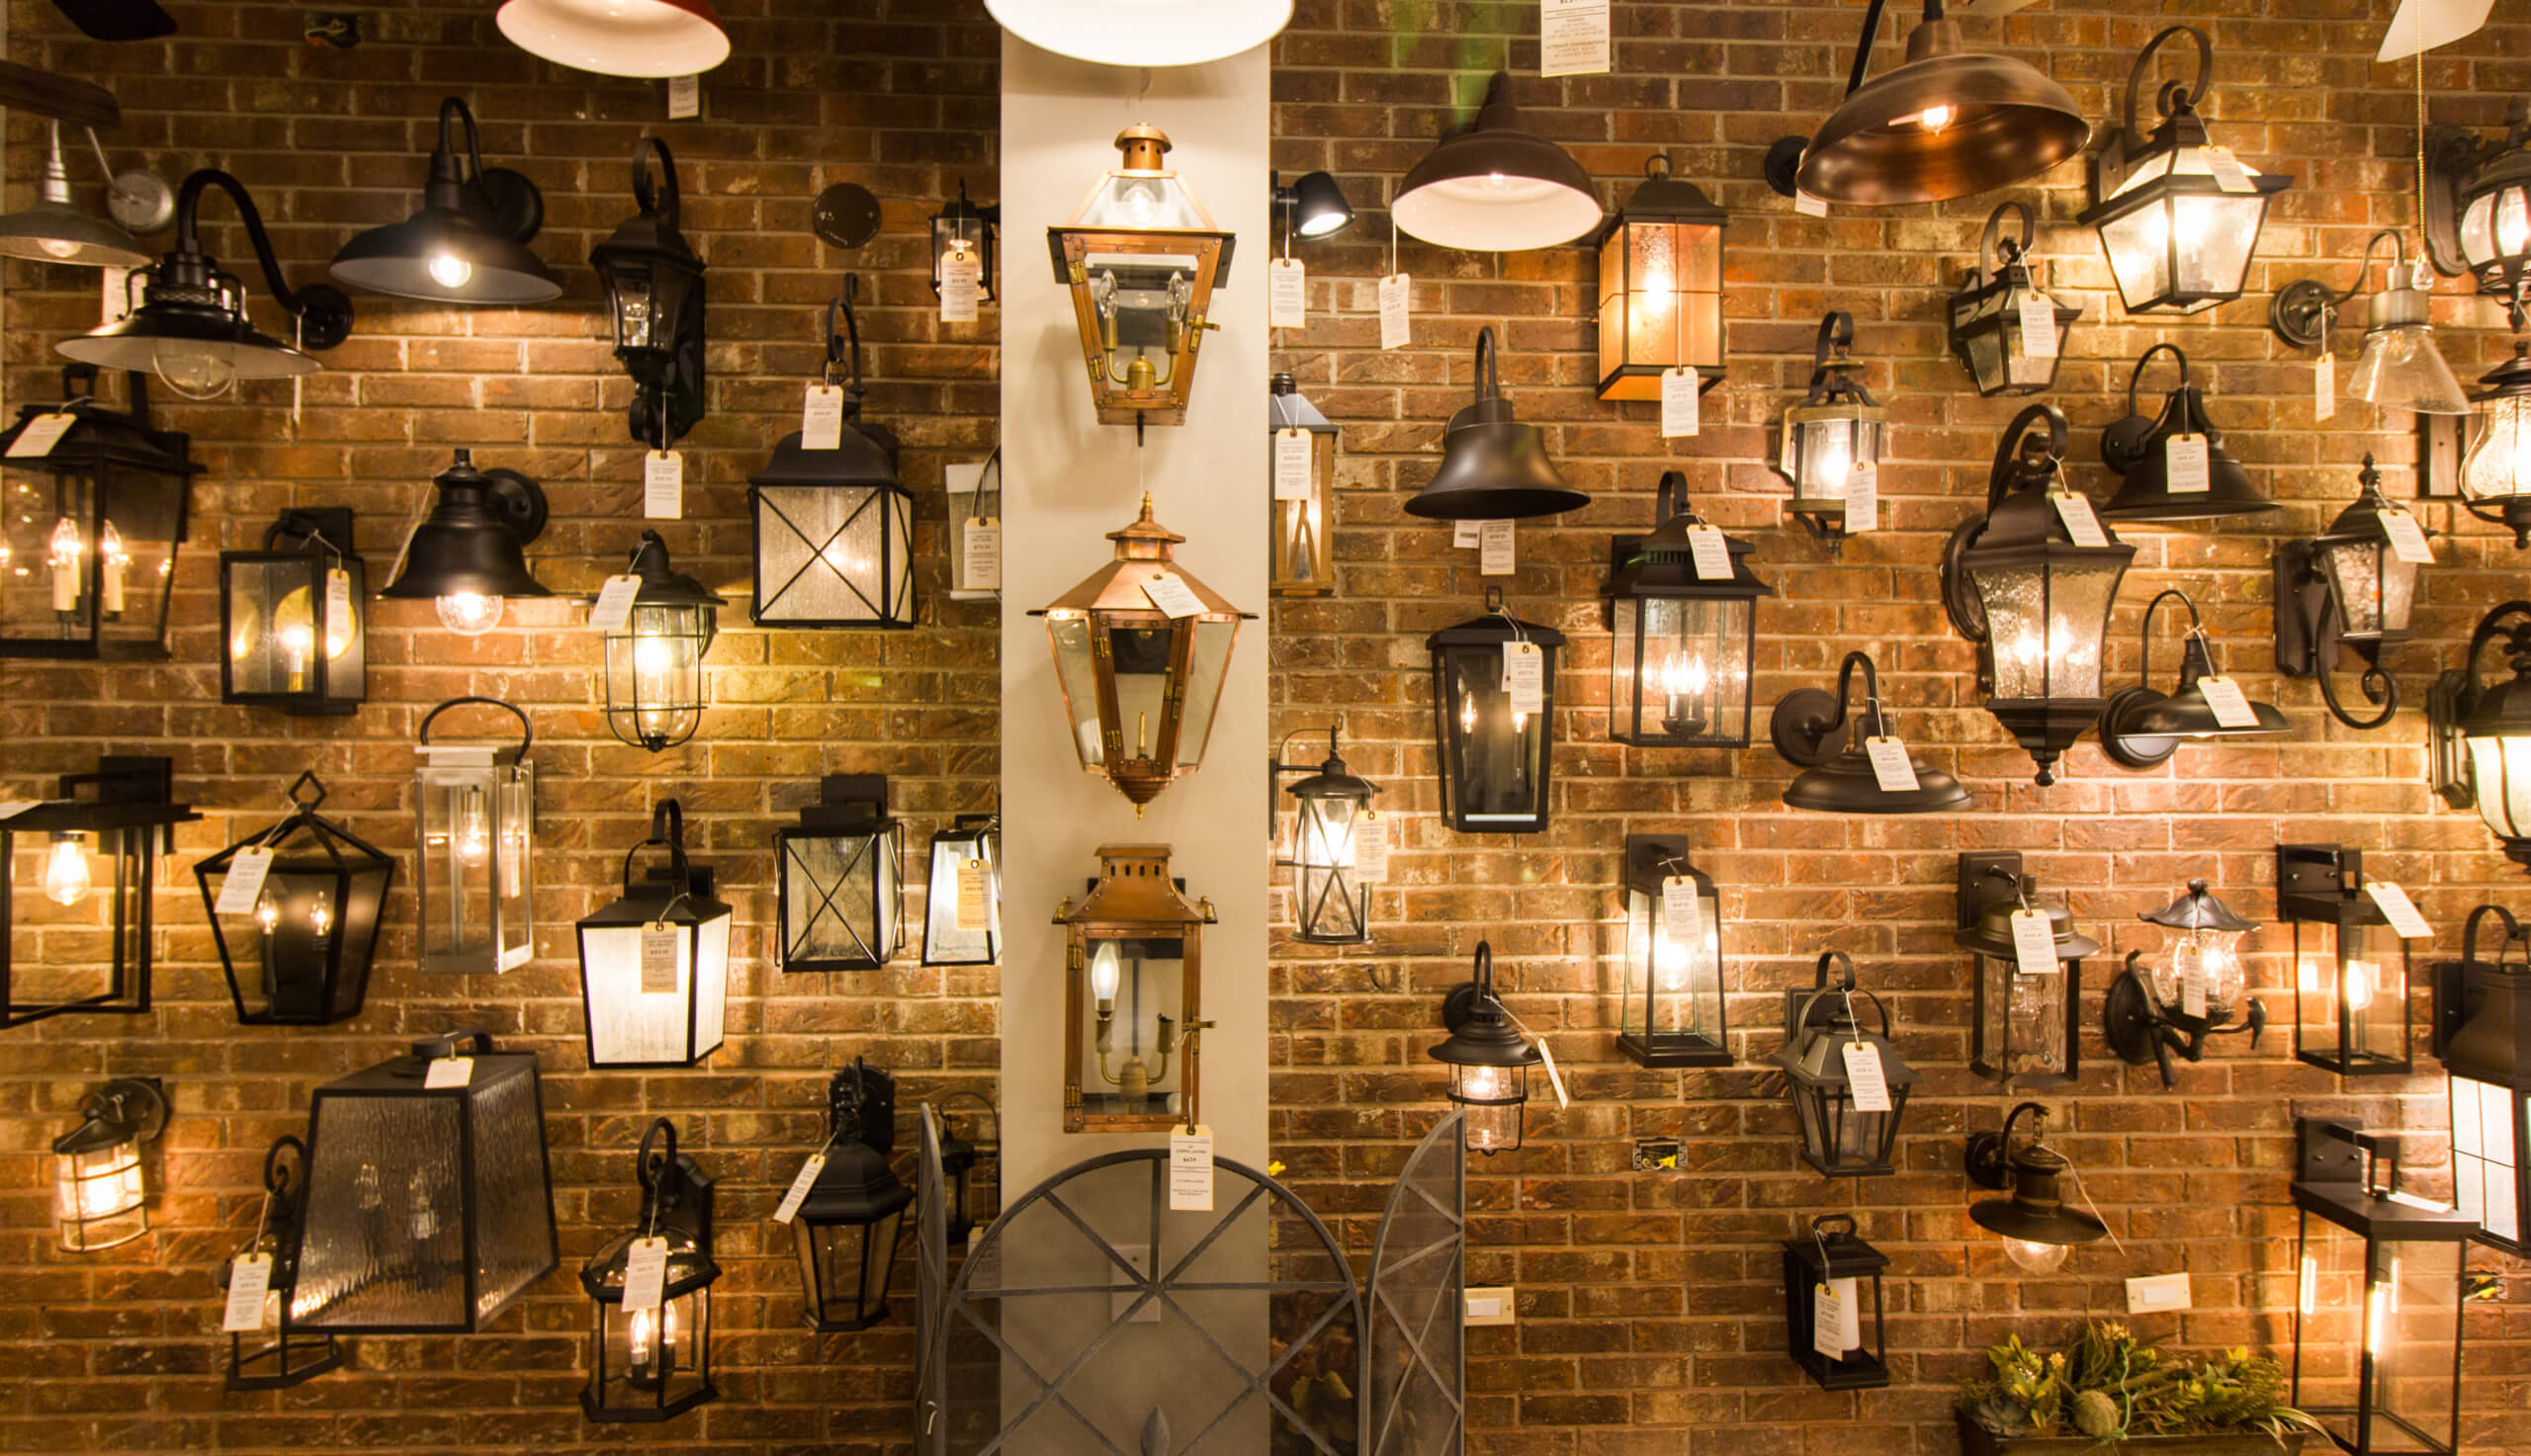 Southside Lighting galley - view of a wall of sconce light fixtures